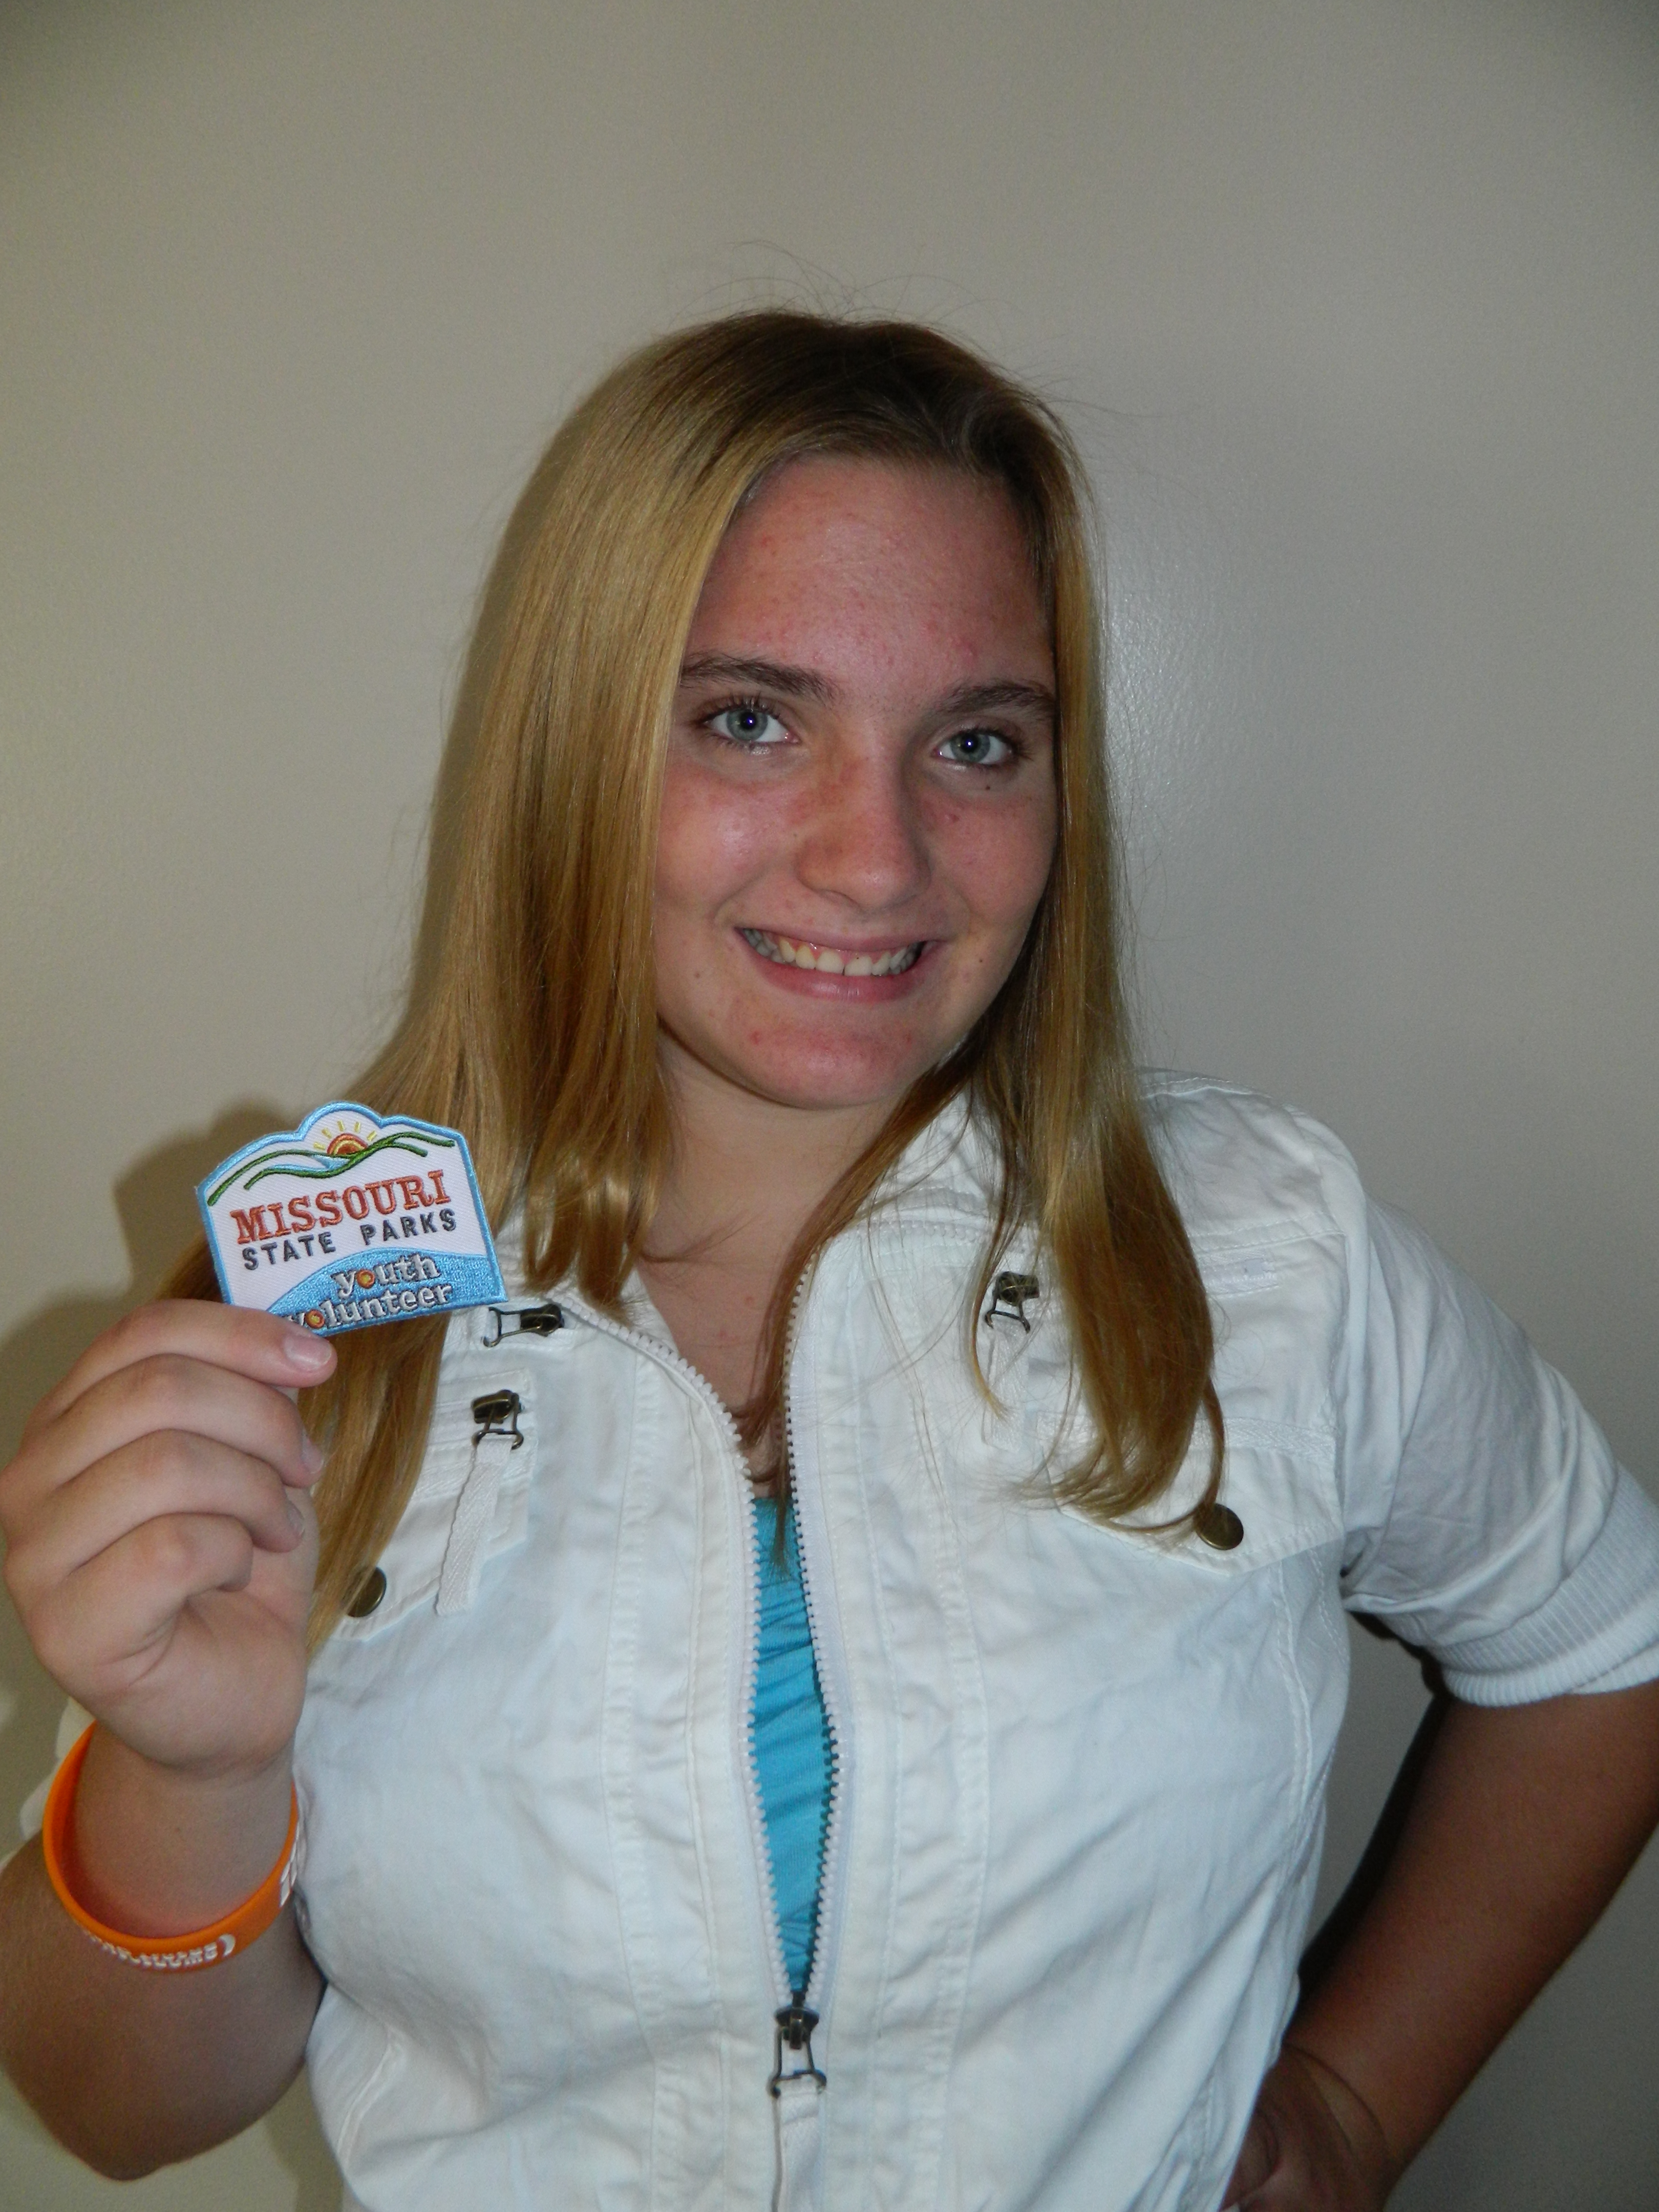 a young girl showing off the patch she earned